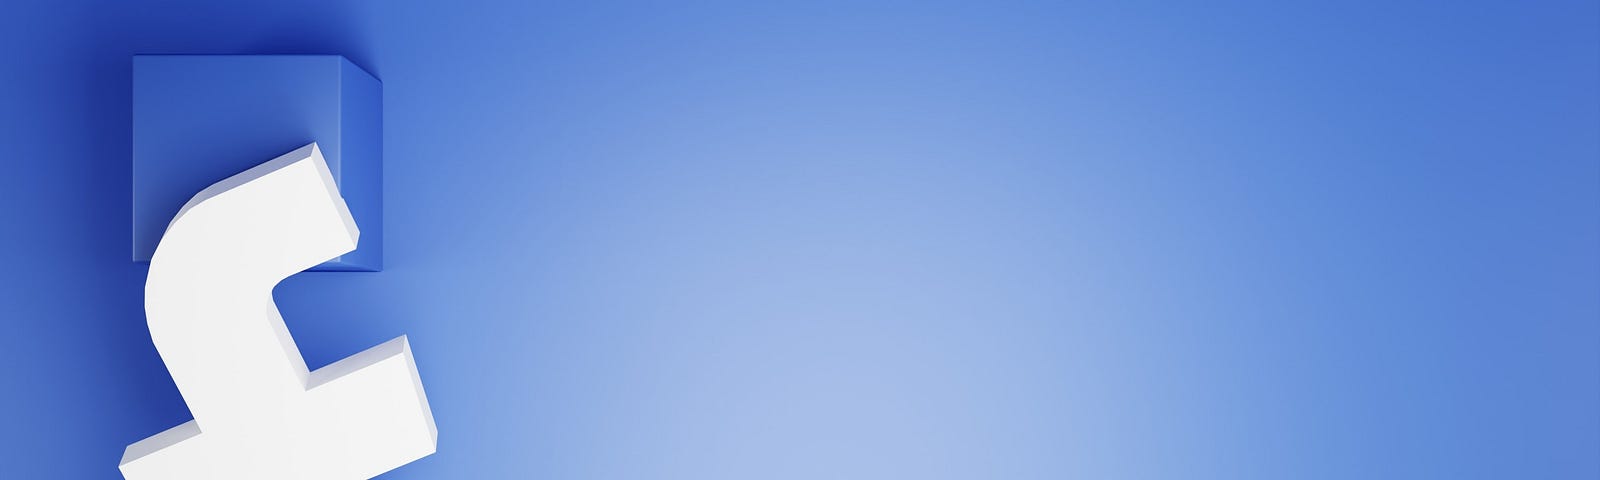 The logo of Facebook against a blue background.